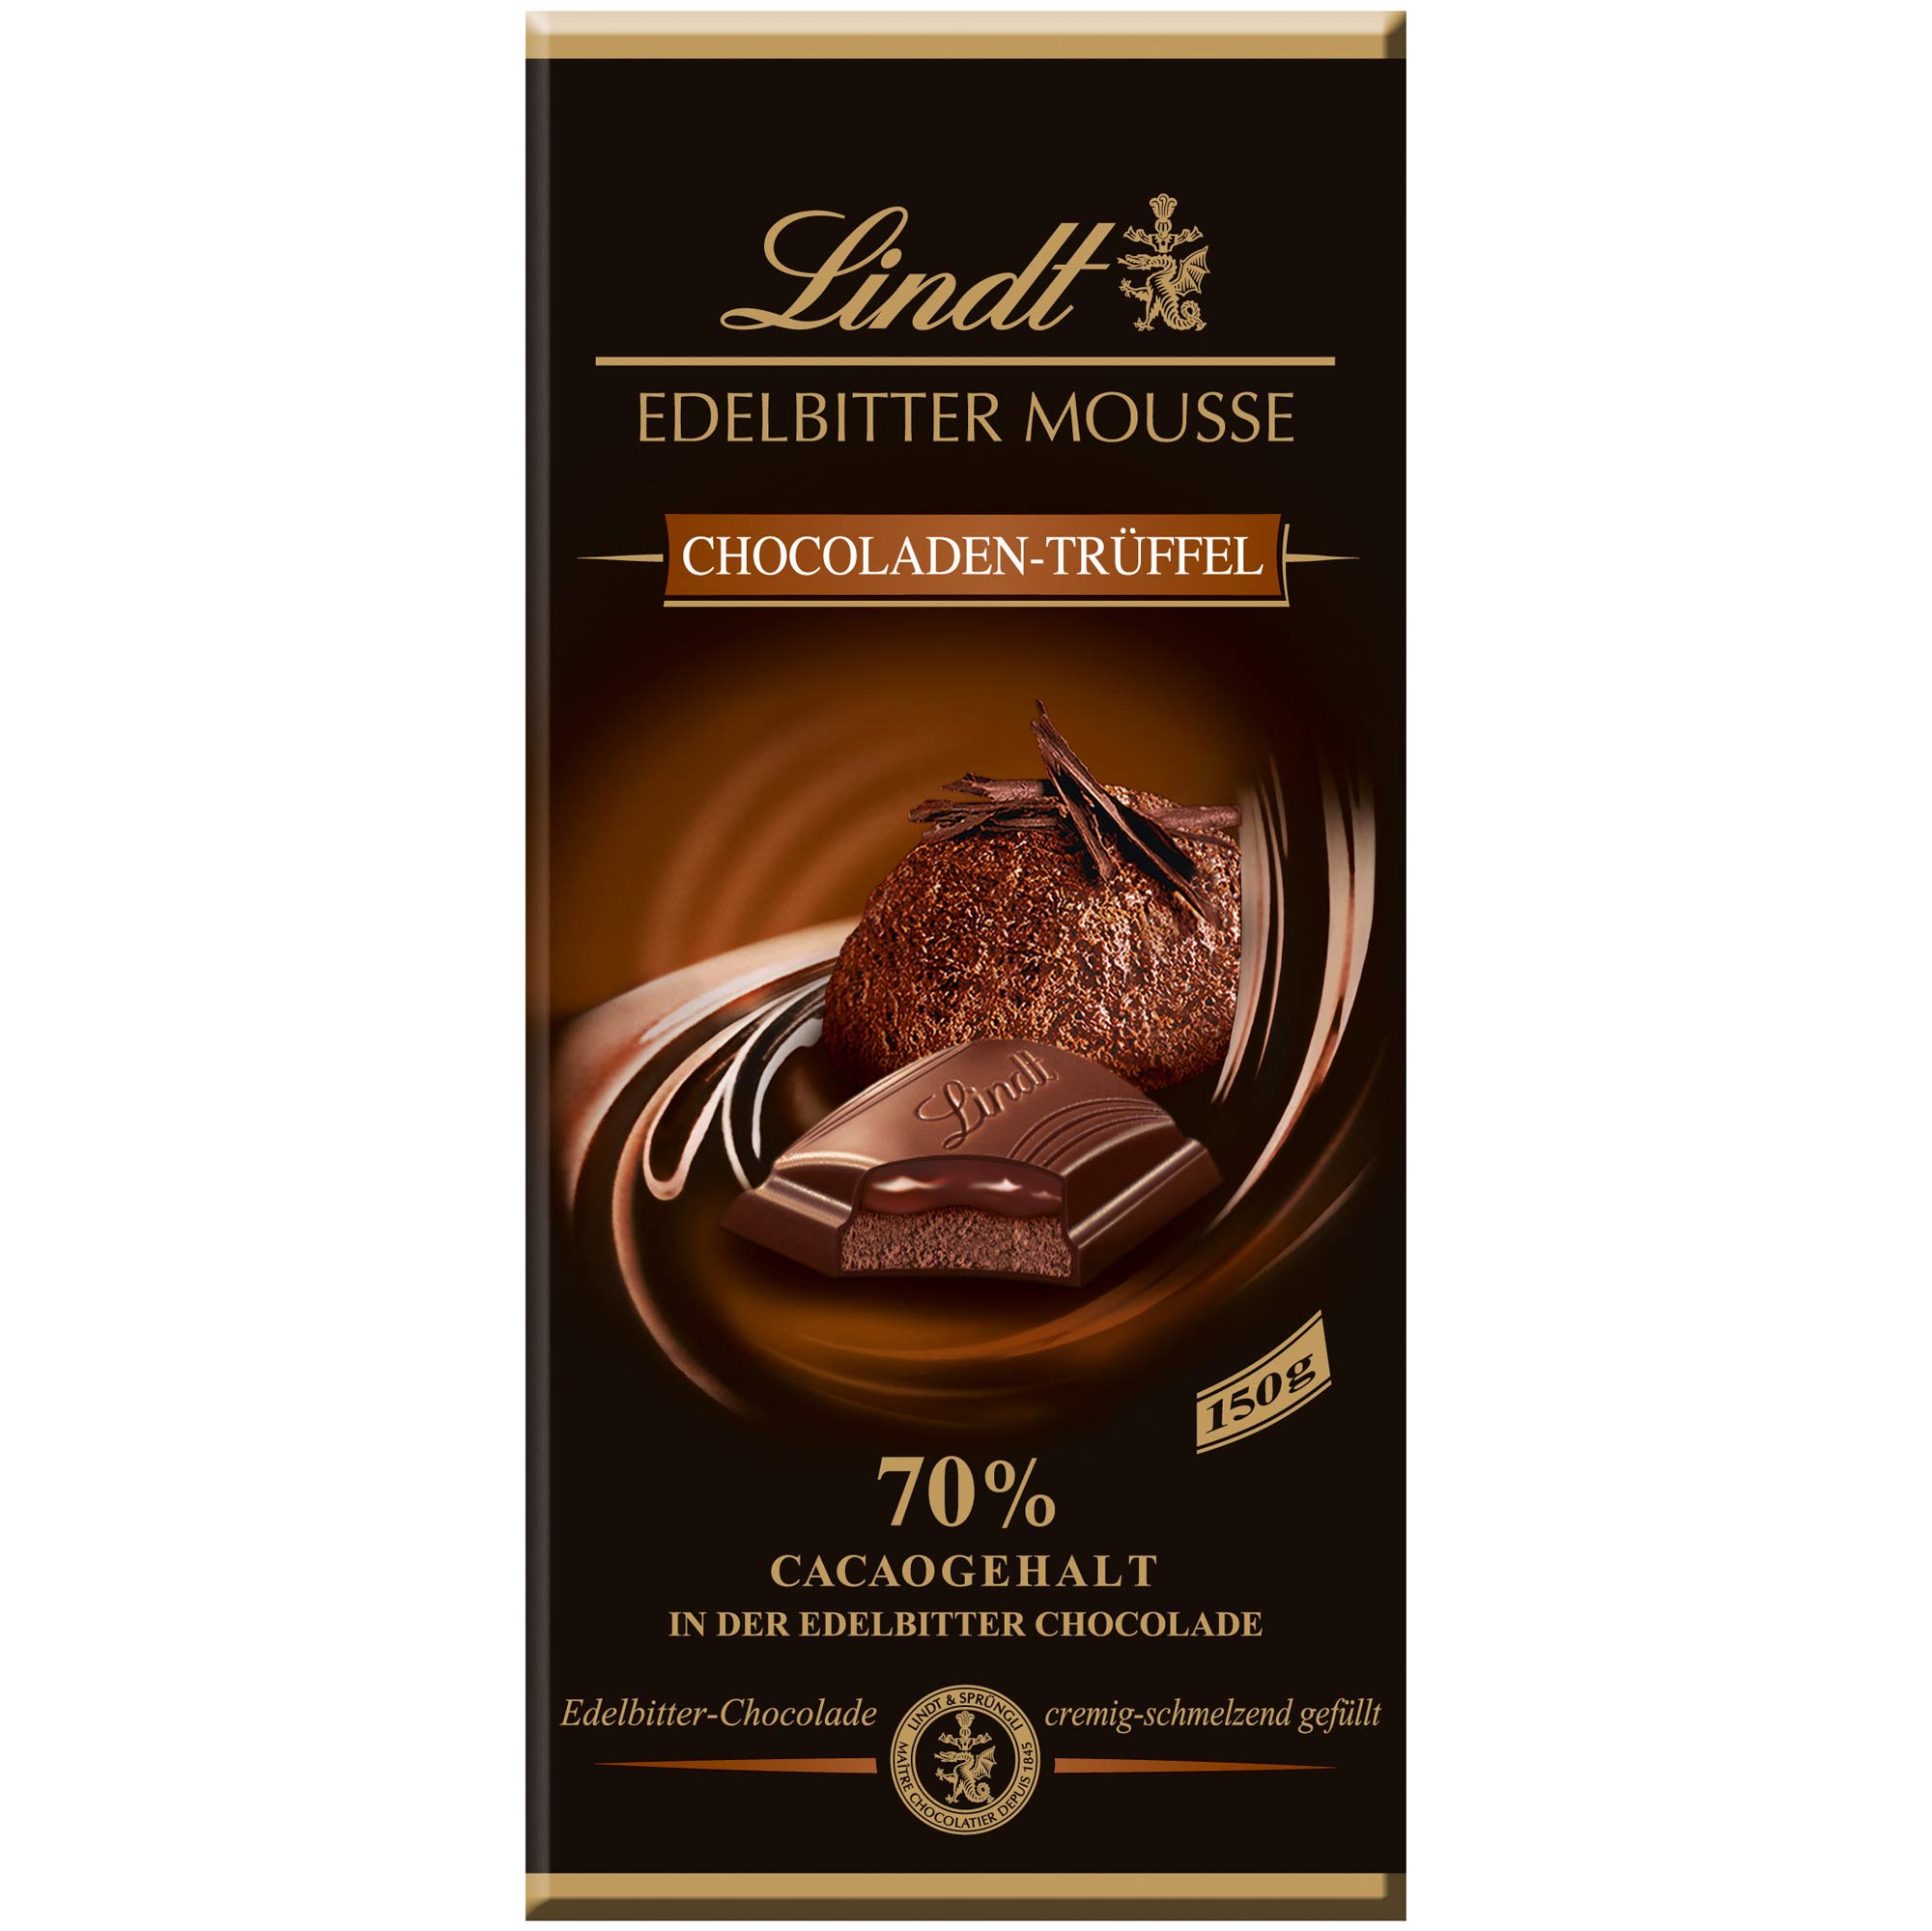 https://www.worldofsweets.de/out/pictures/master/product/1/lindt-edelbitter-mousse-chocoladen-tr-ffel.jpg